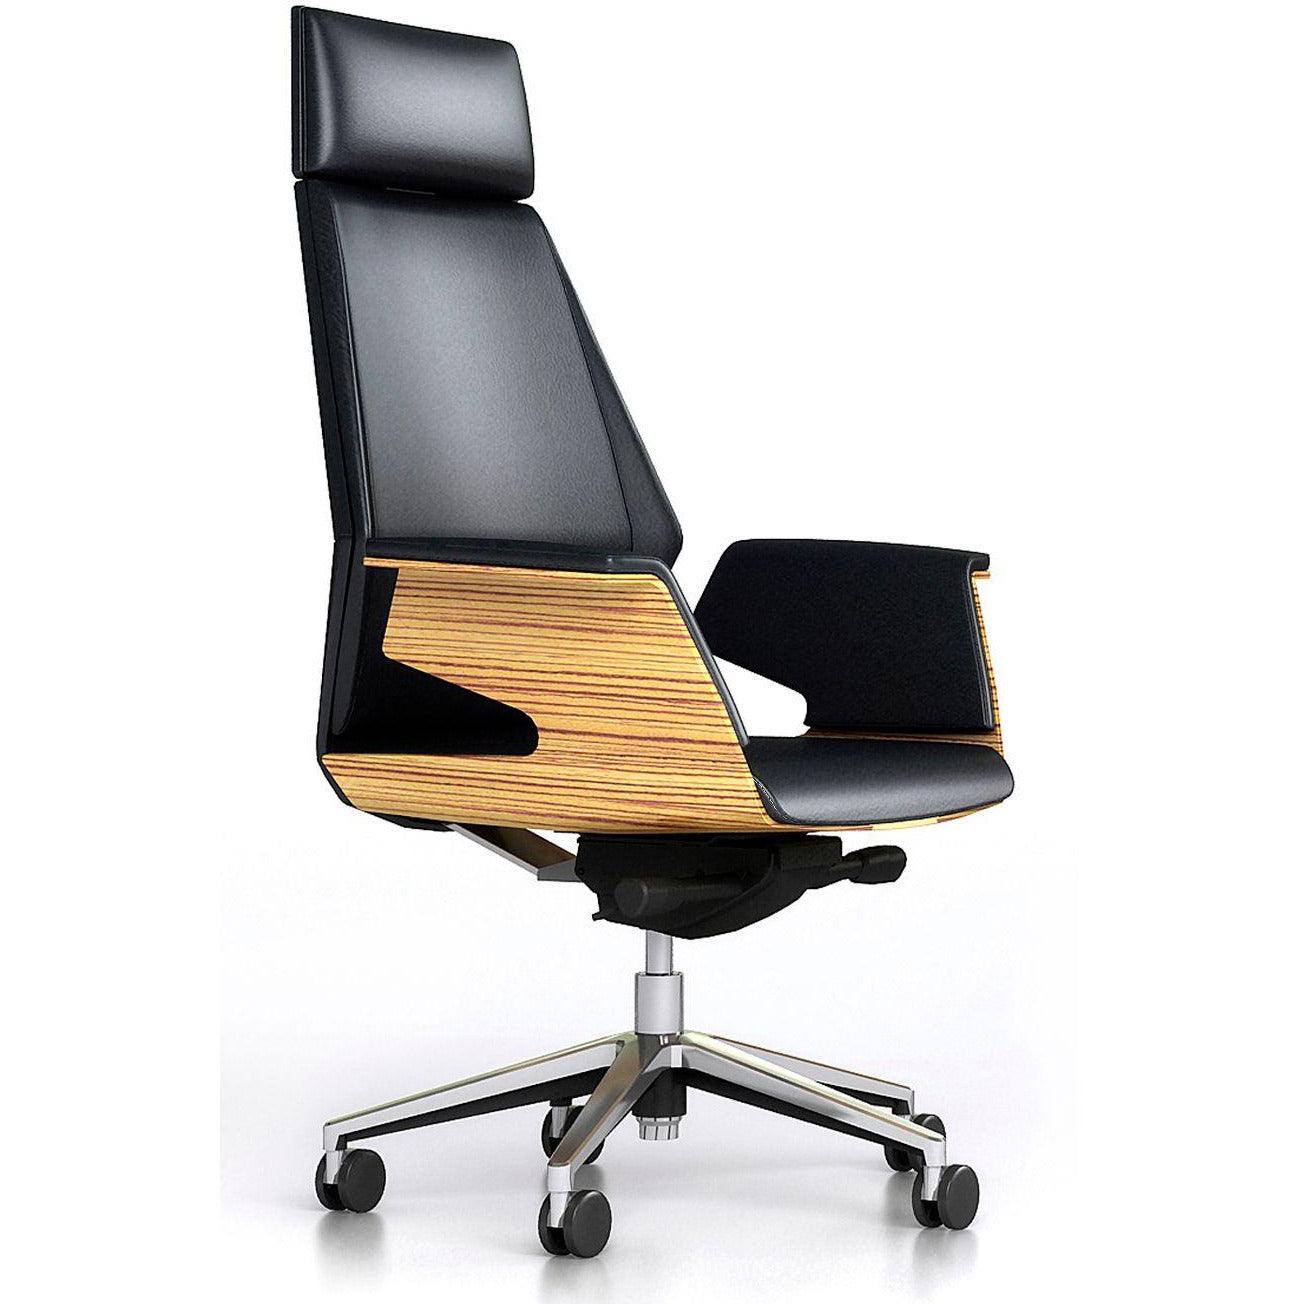 Executor V Luxury Leather Chair - Office Furniture Company 